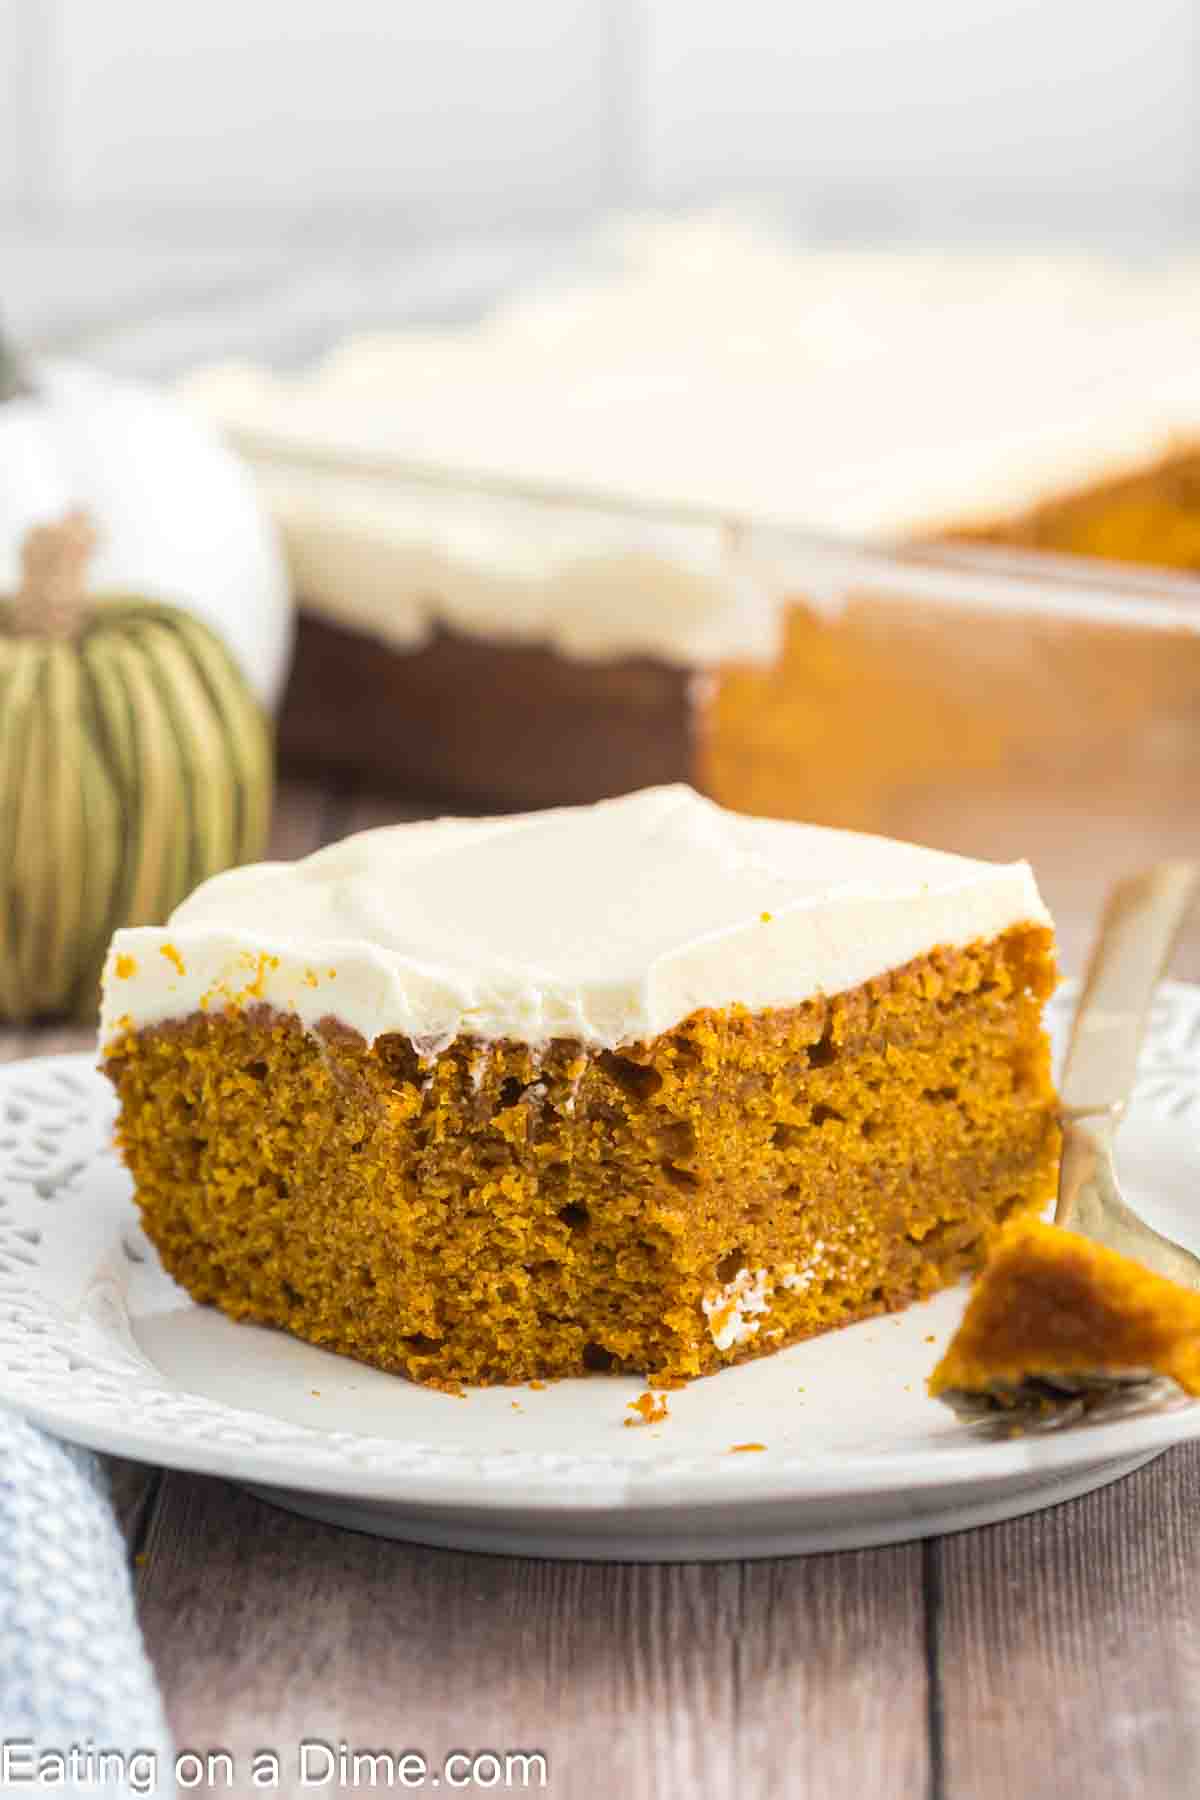 Slice of pumpkin cake with cream cheese frosting